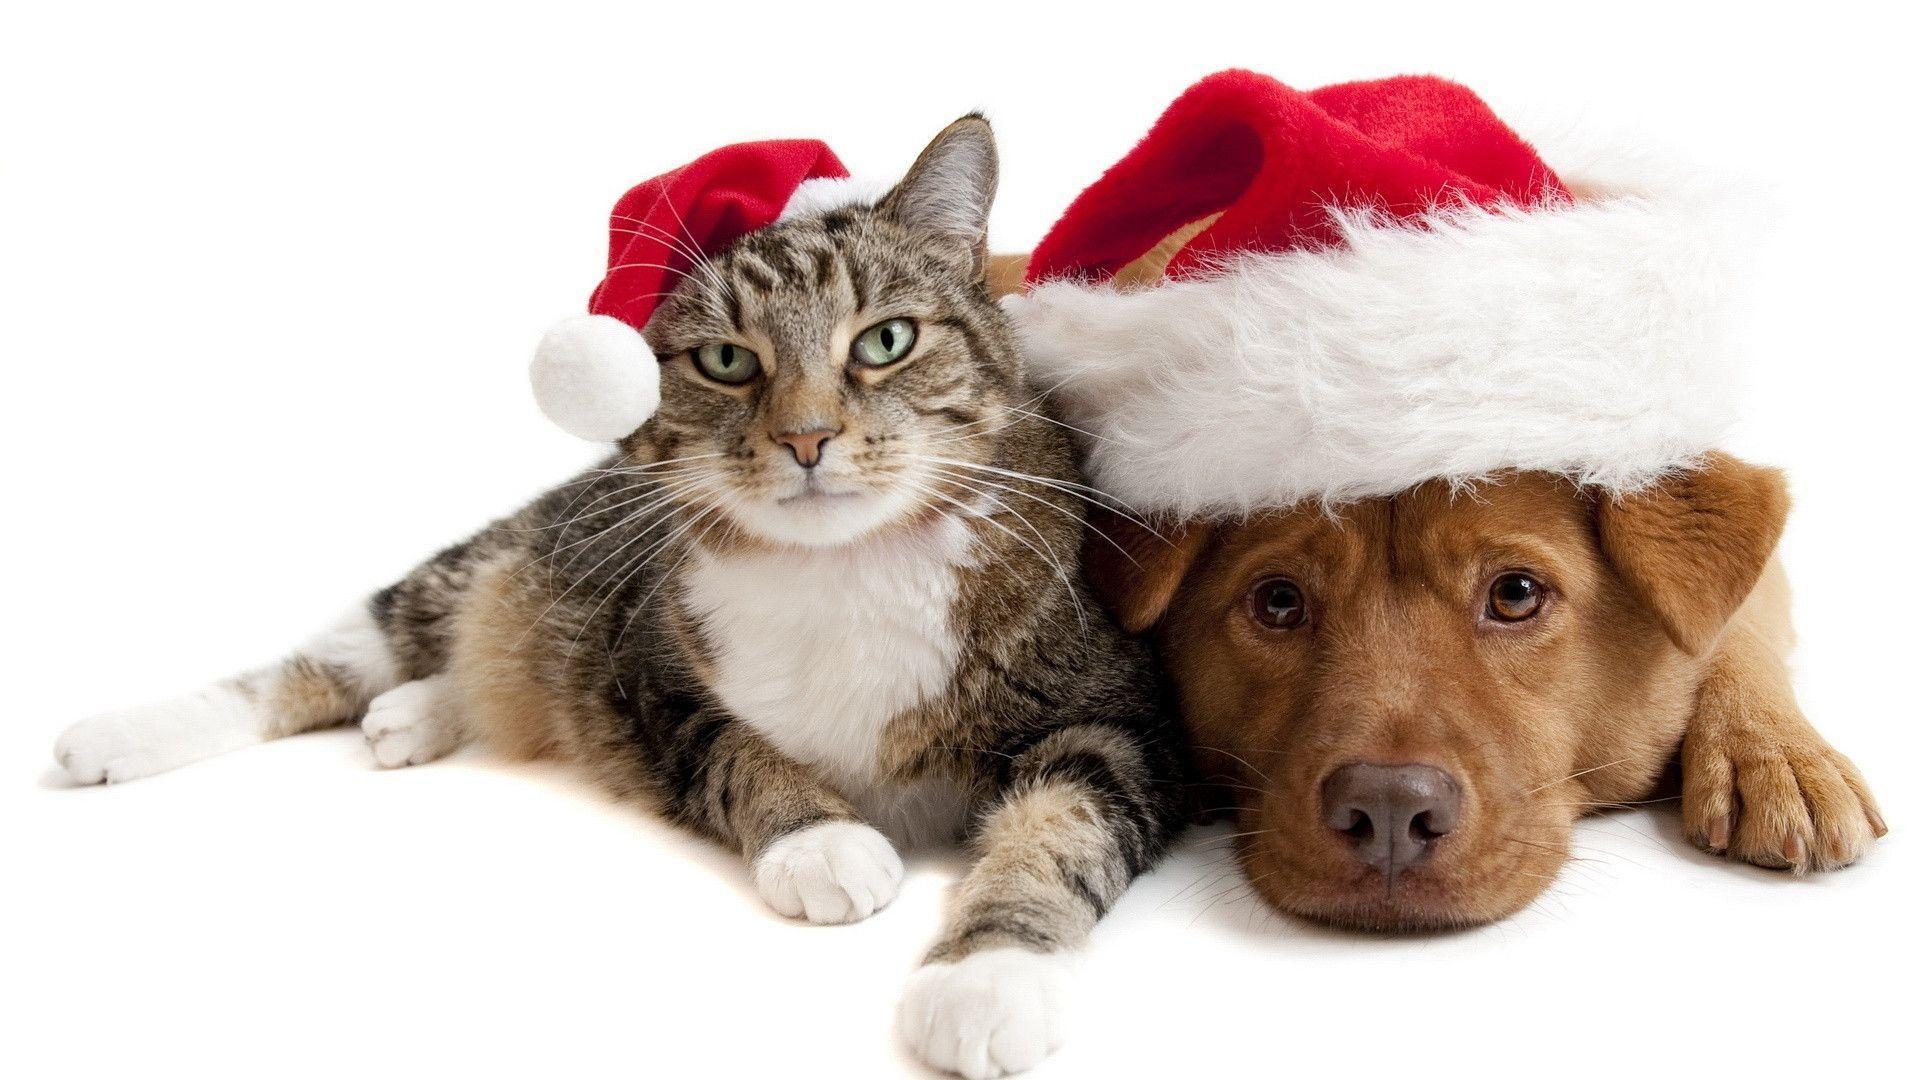 Cute Kittens and Dogs Christmas HD Wallpaper For Desktop